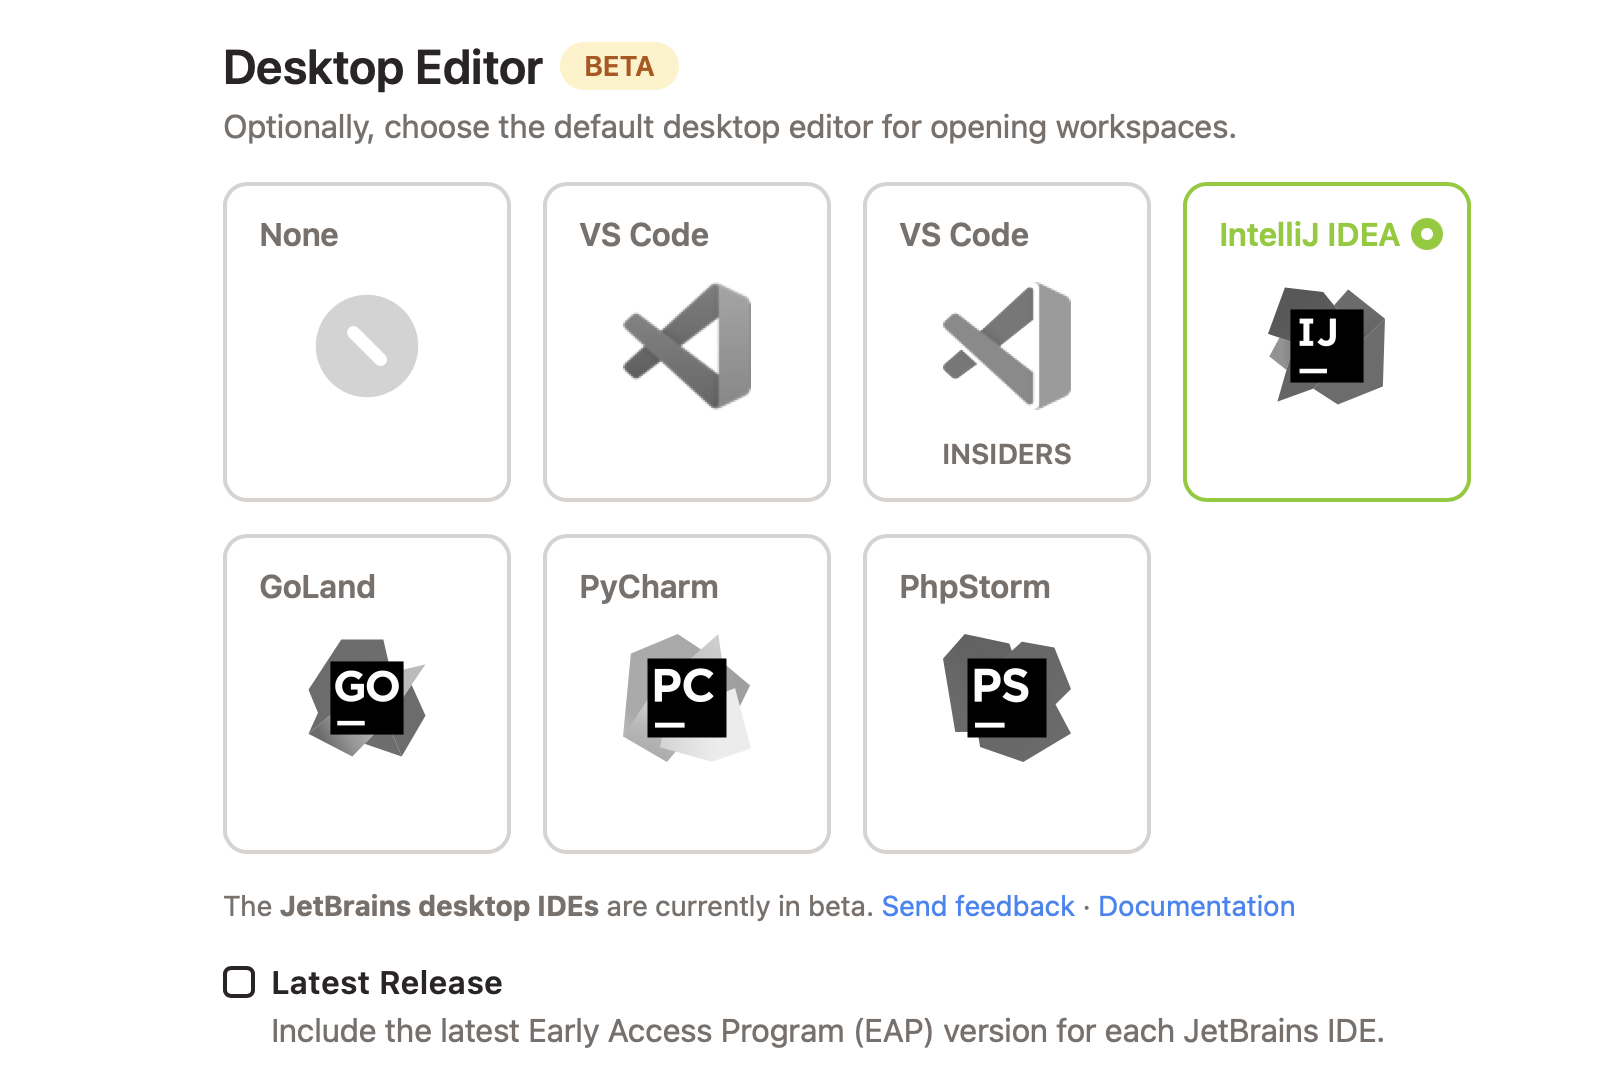 The Gitpod preferences page for desktop editor, with IntelliJ IDEA selected as the default editor